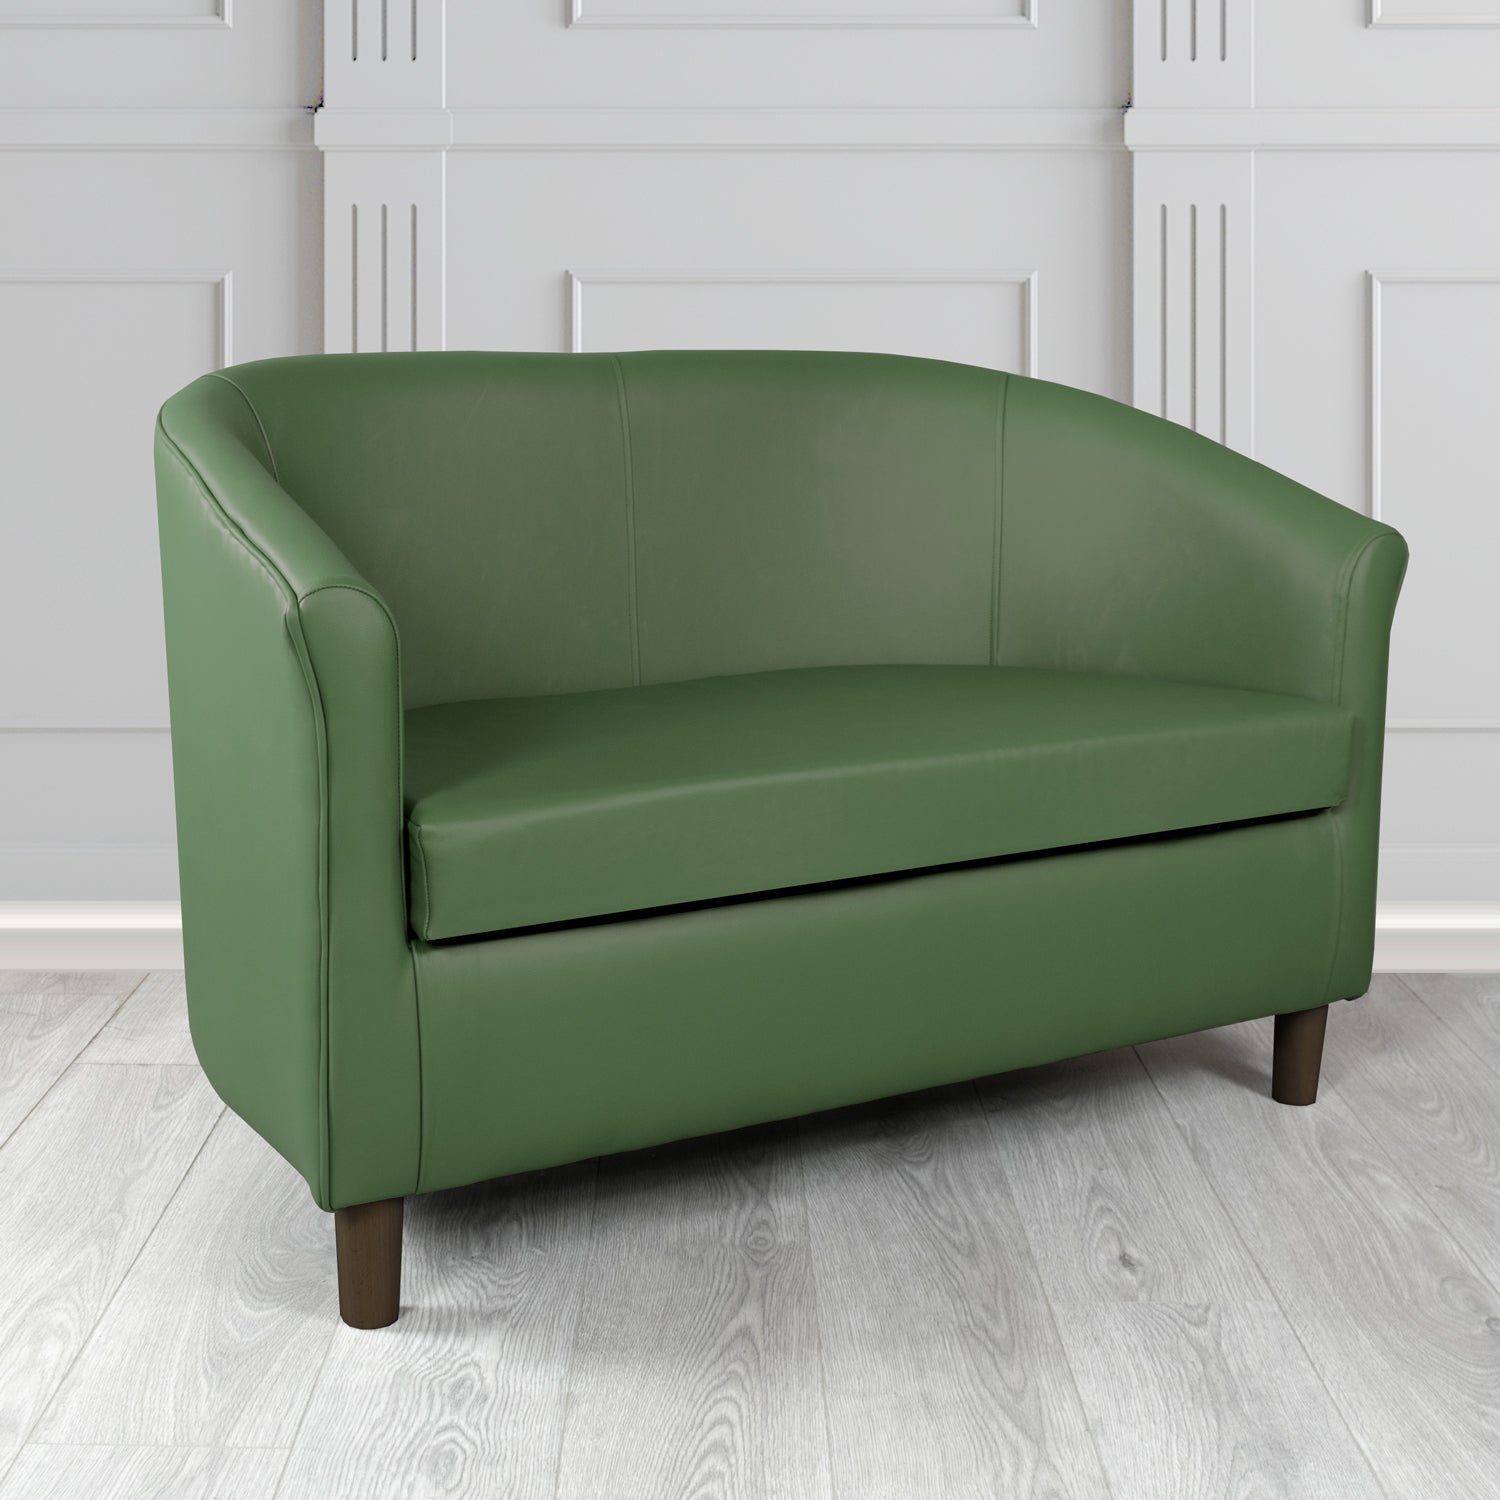 Tuscany Shelly Forest Green Crib 5 Genuine Leather 2 Seater Tub Sofa